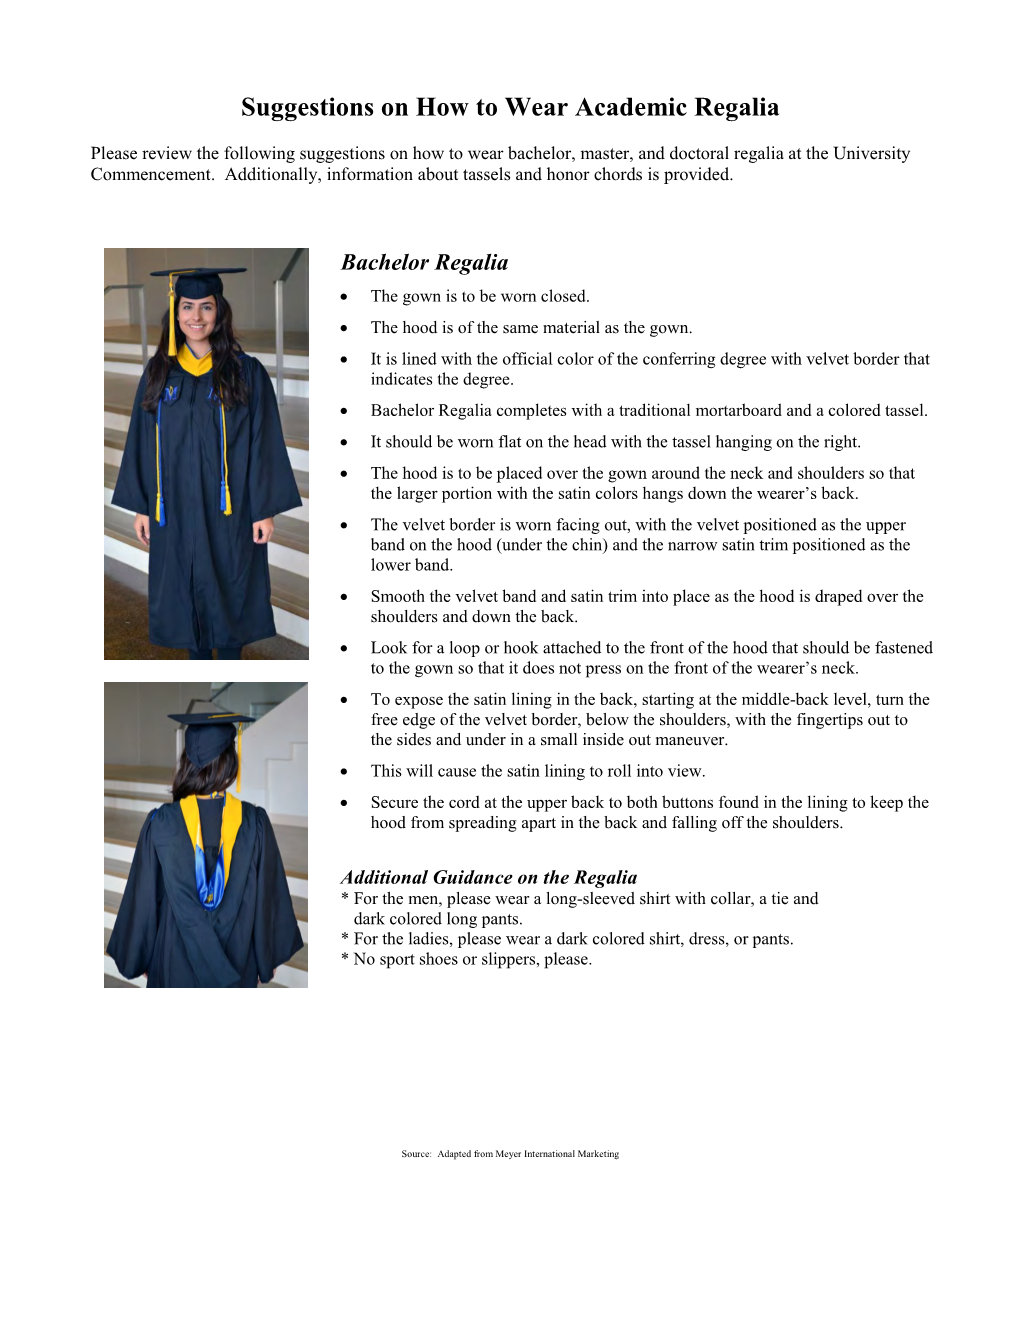 How to Wear Your Academic Regalia